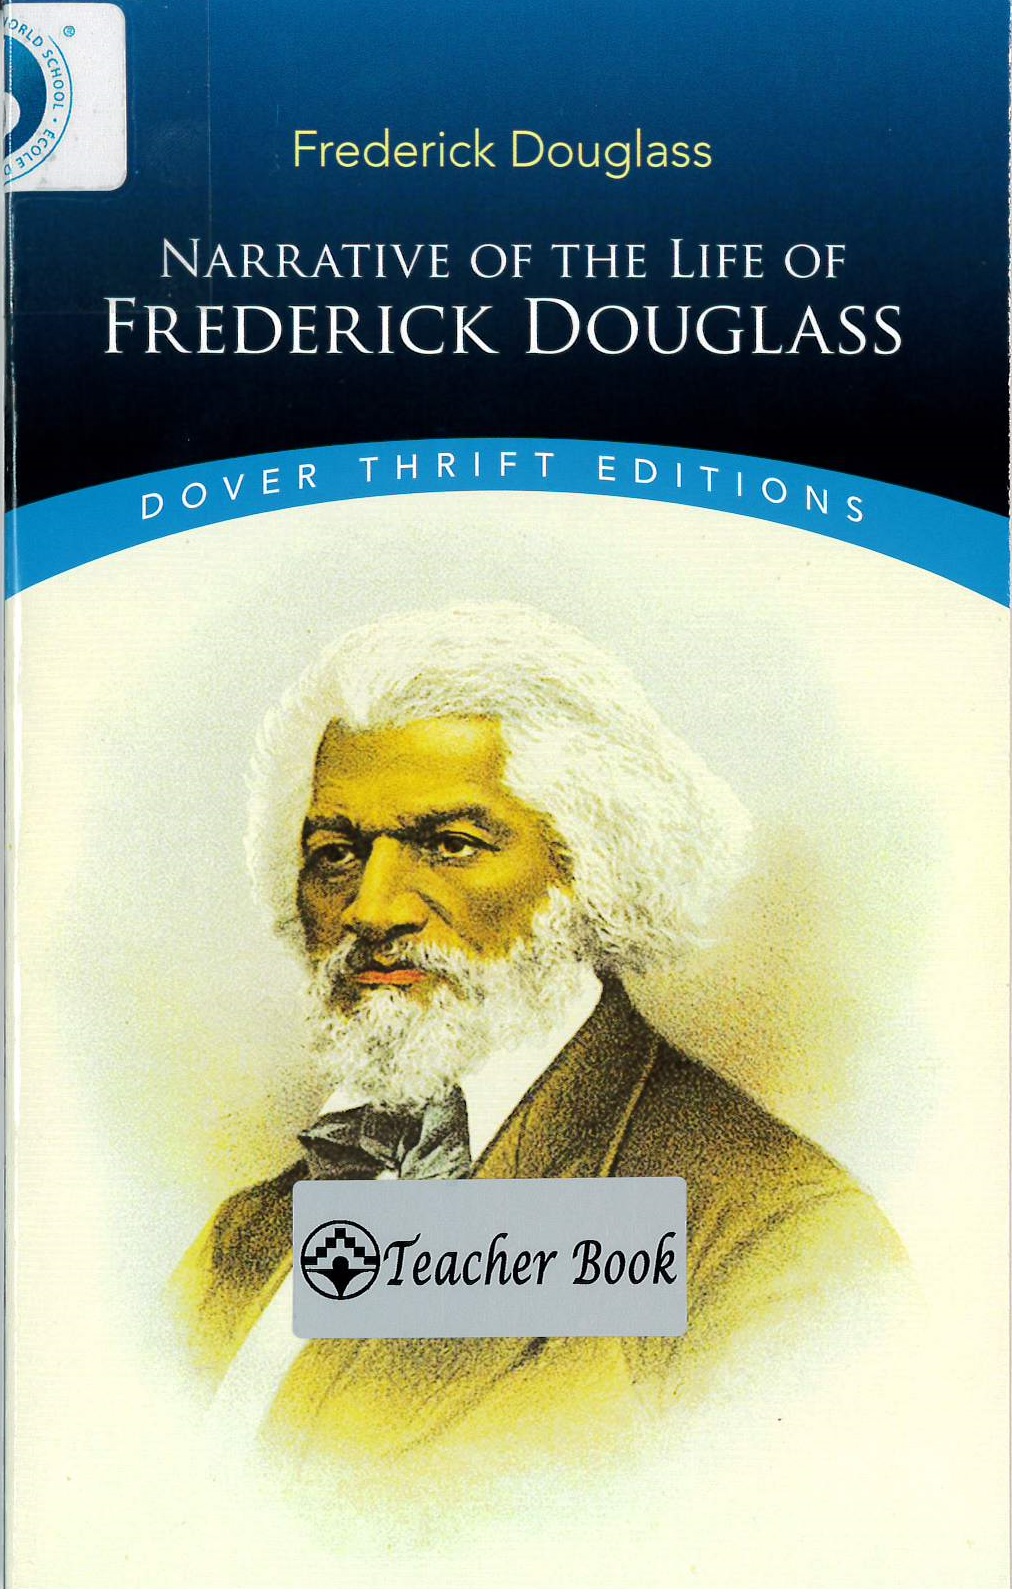 Narrative of the life of Frederick Douglass